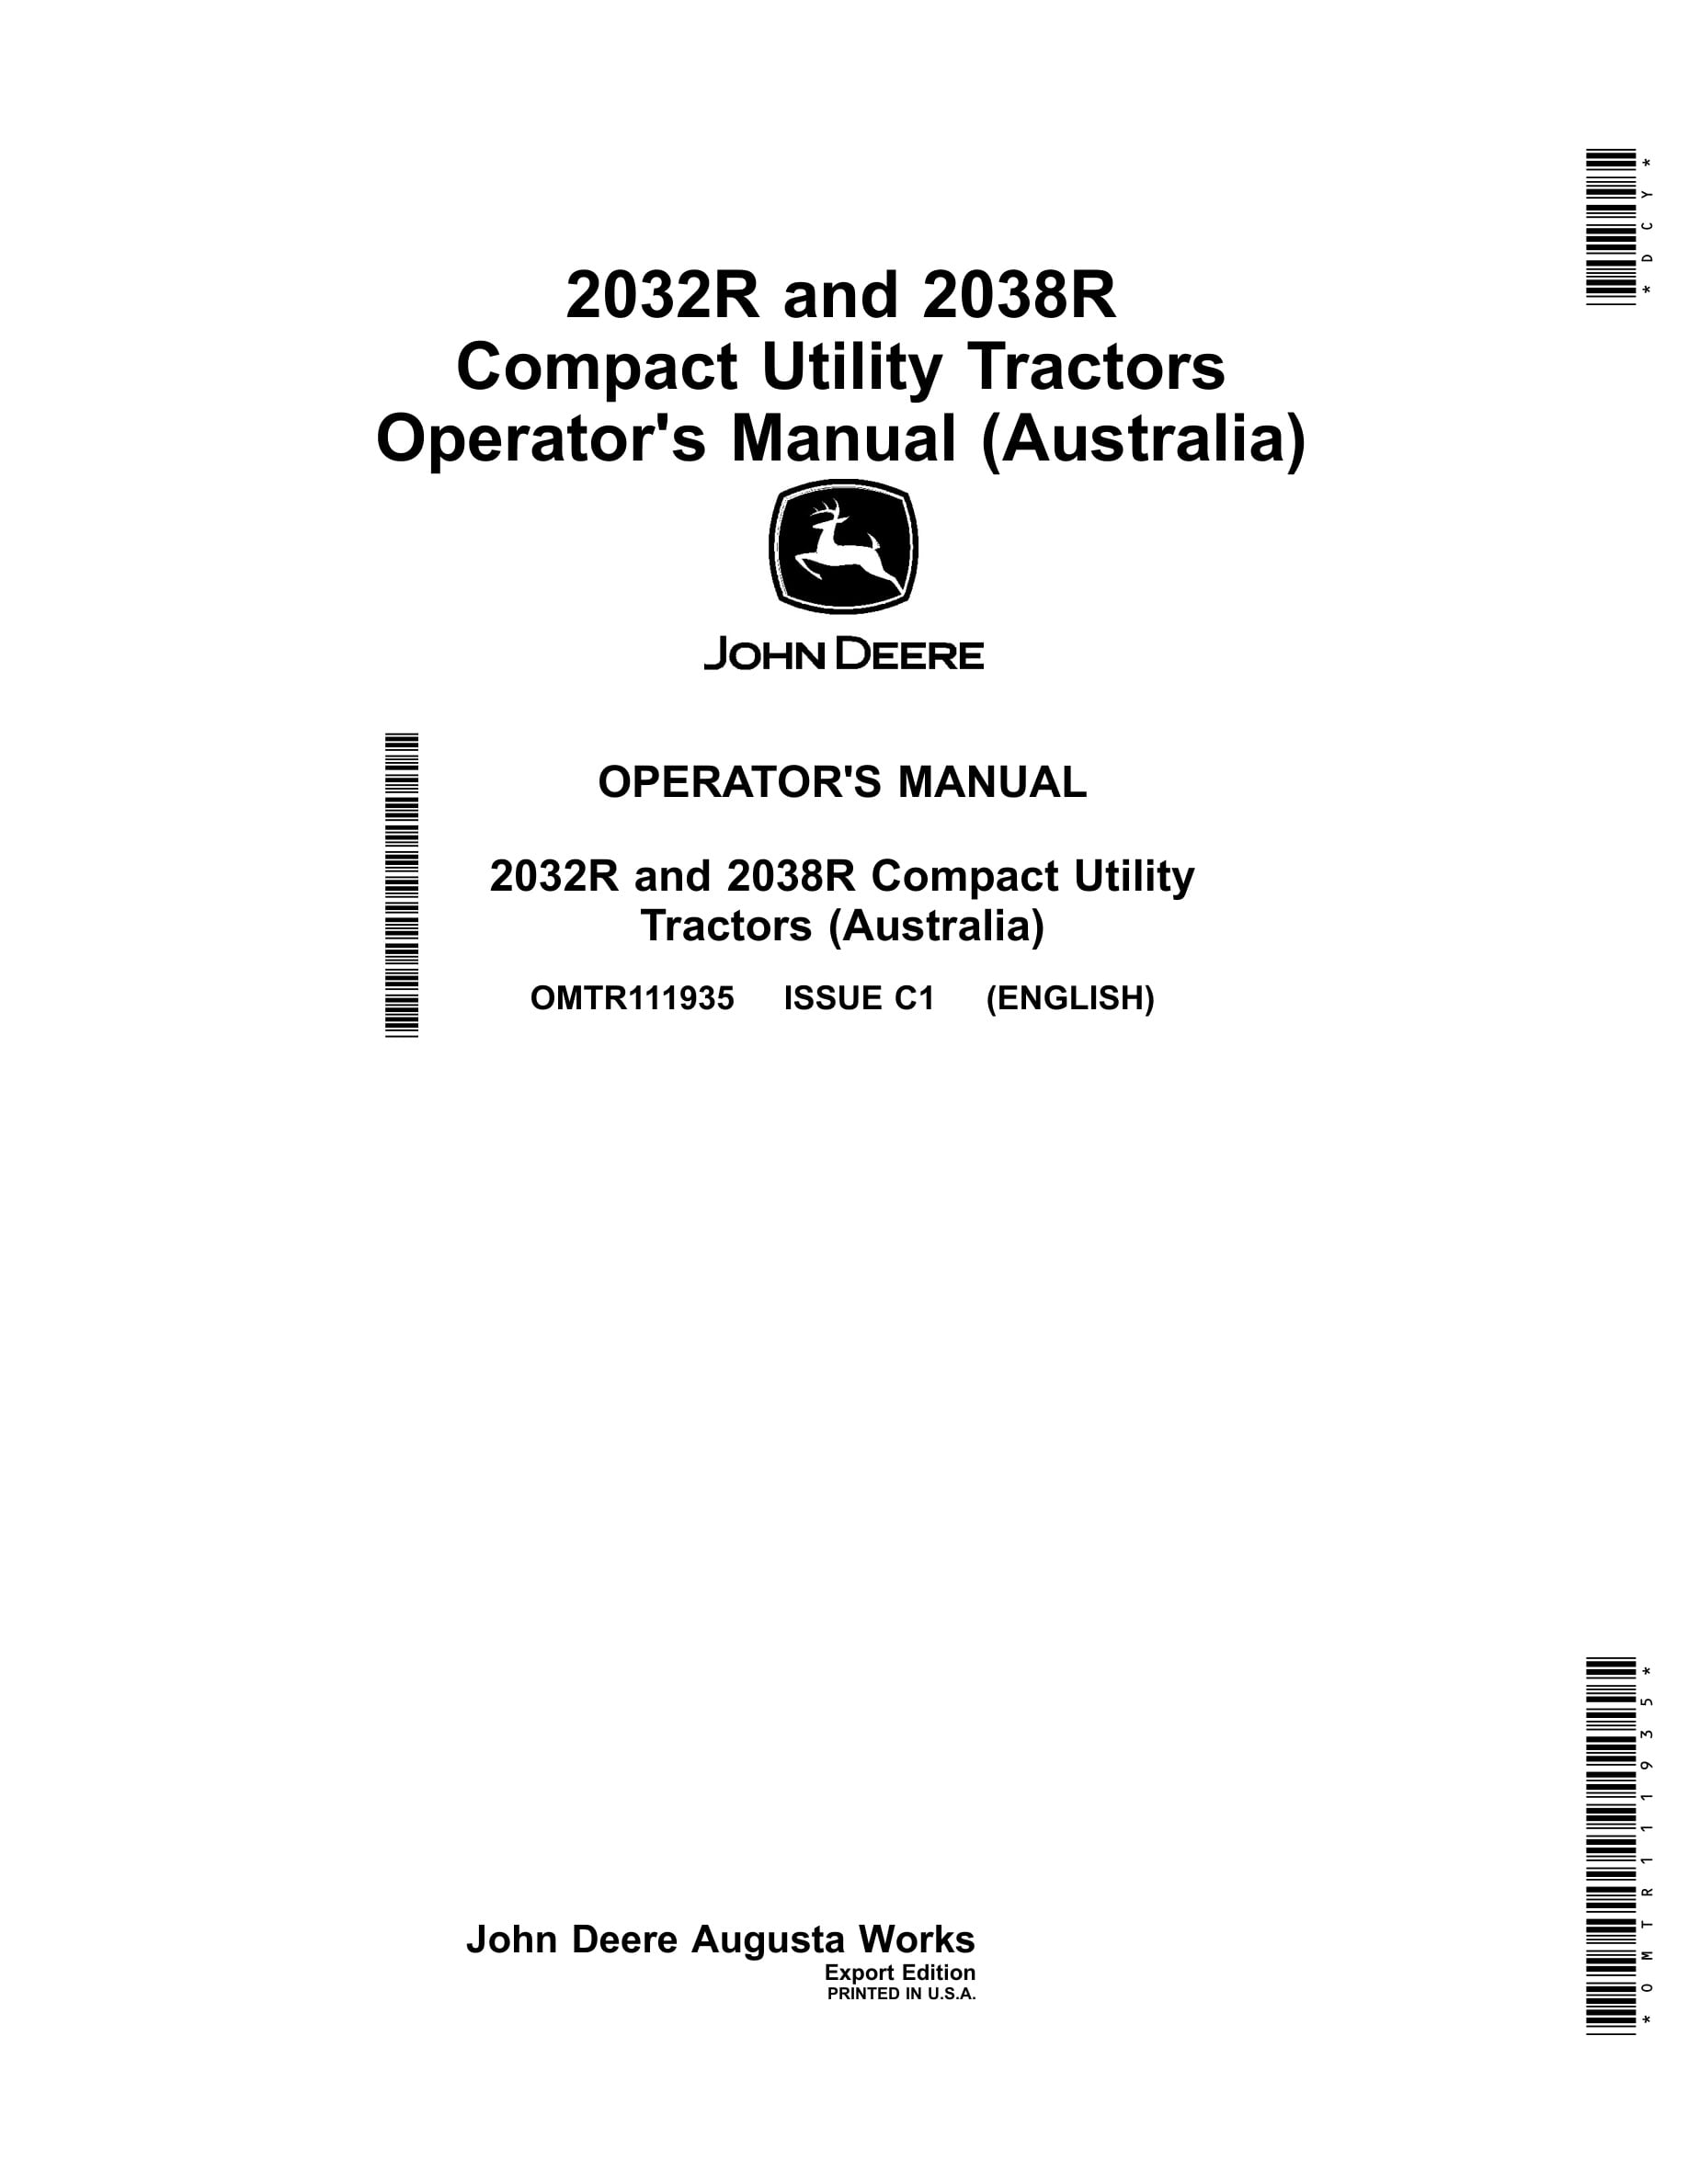 John Deere 2032r And 2038r Compact Utility Tractors Operator Manuals OMTR111935-1